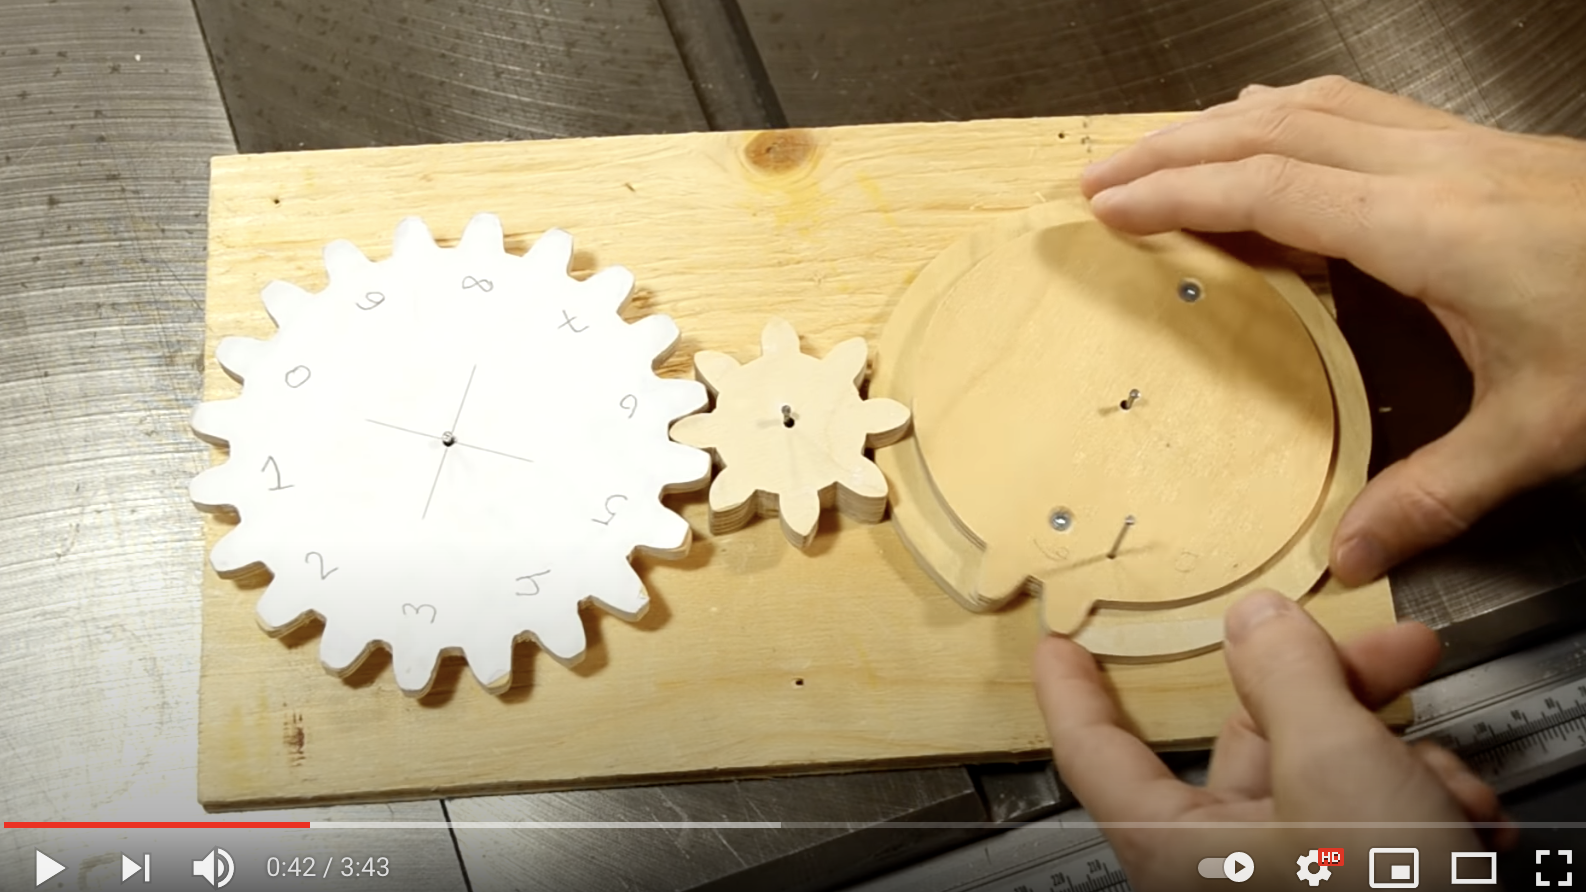 Youtube: How mechanical counters work, gears